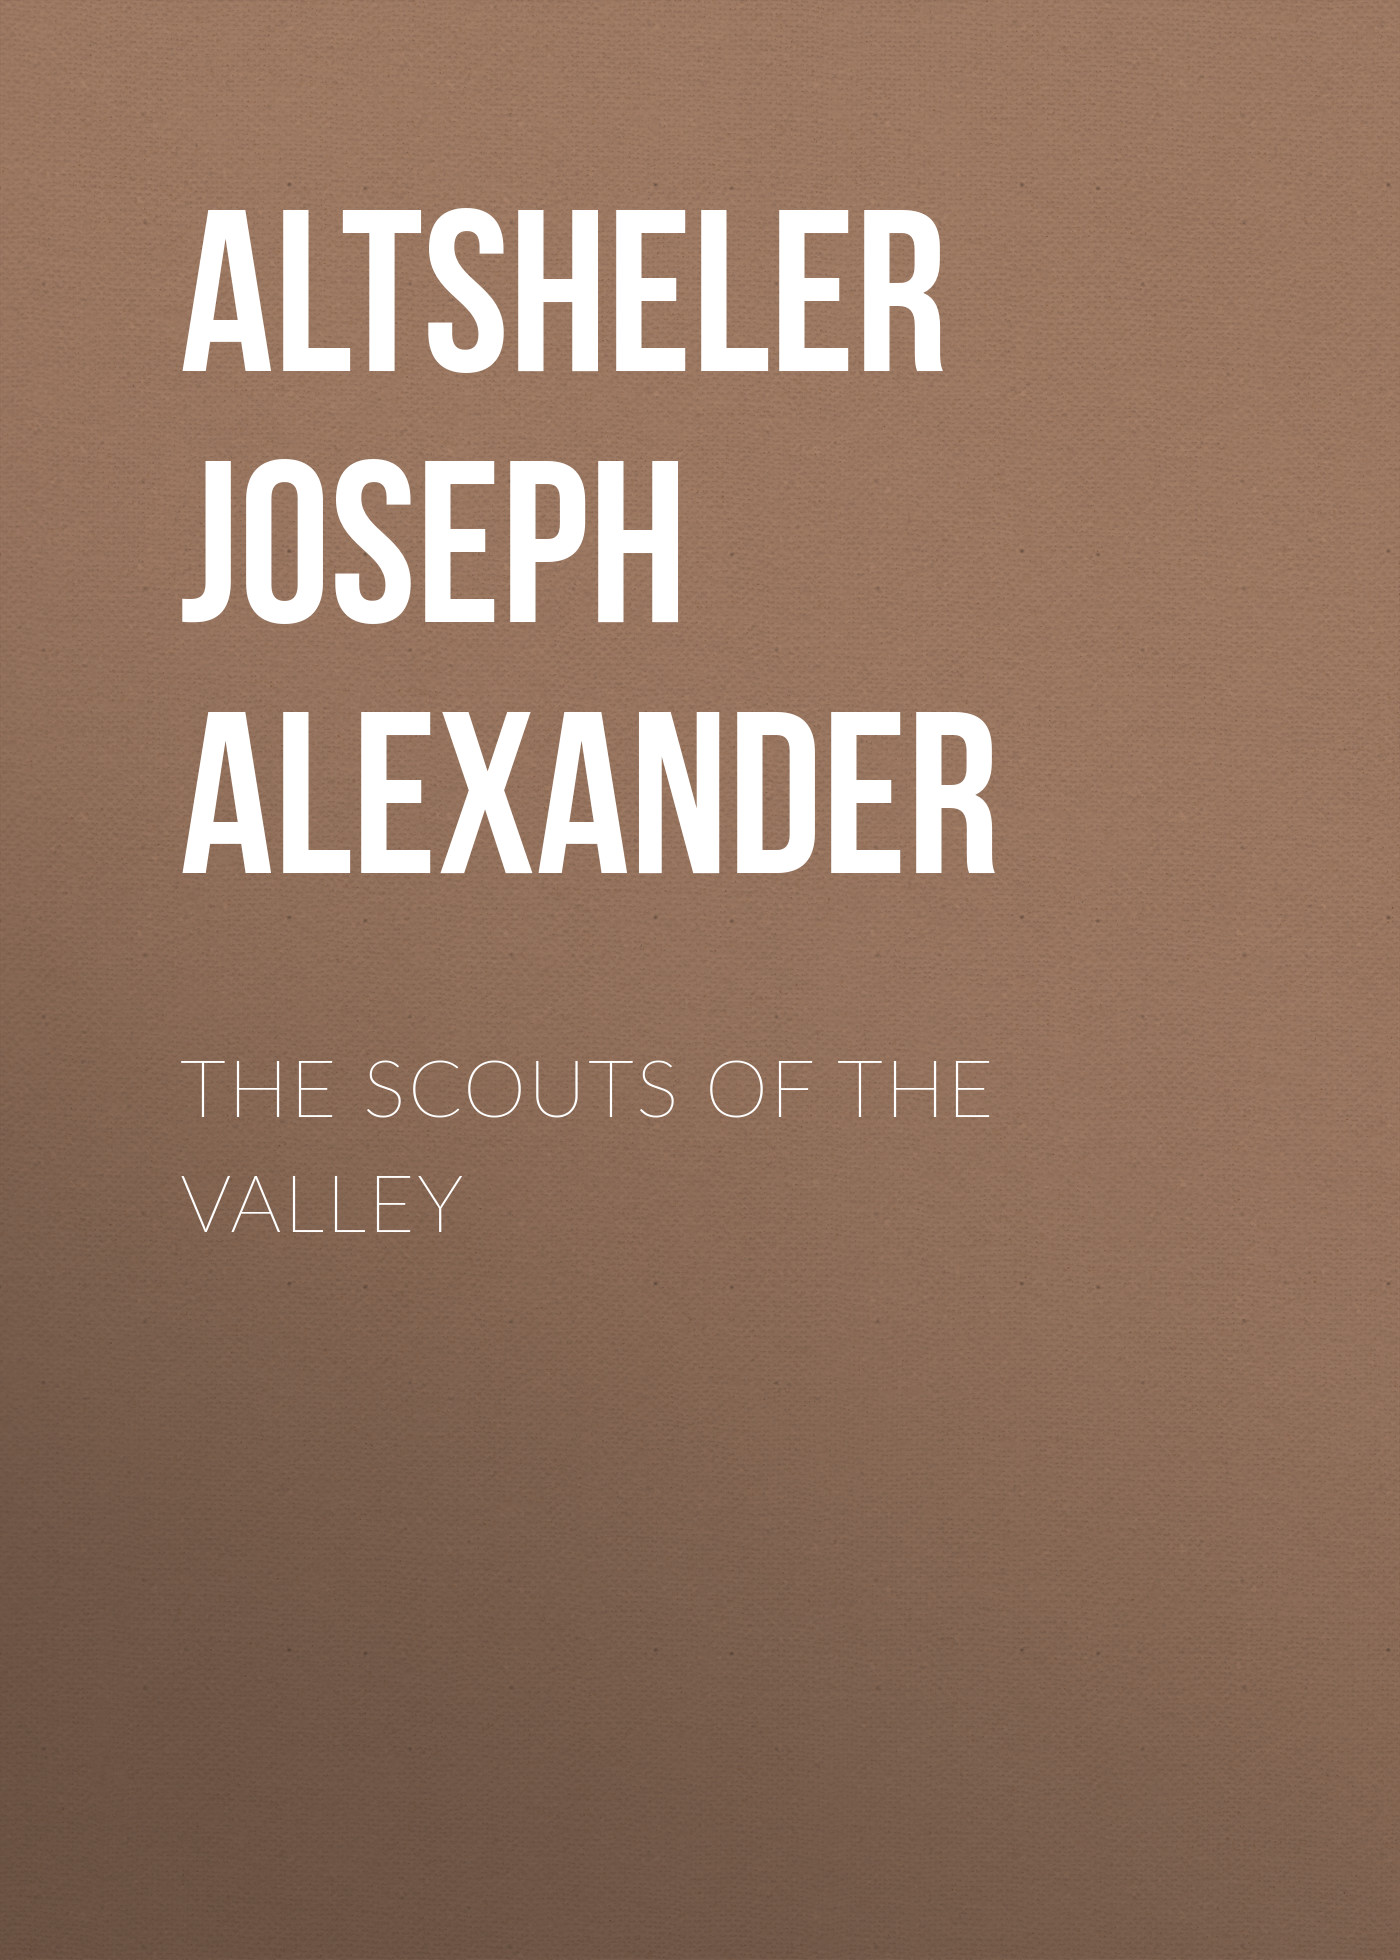 Altsheler Joseph Alexander The Scouts of the Valley